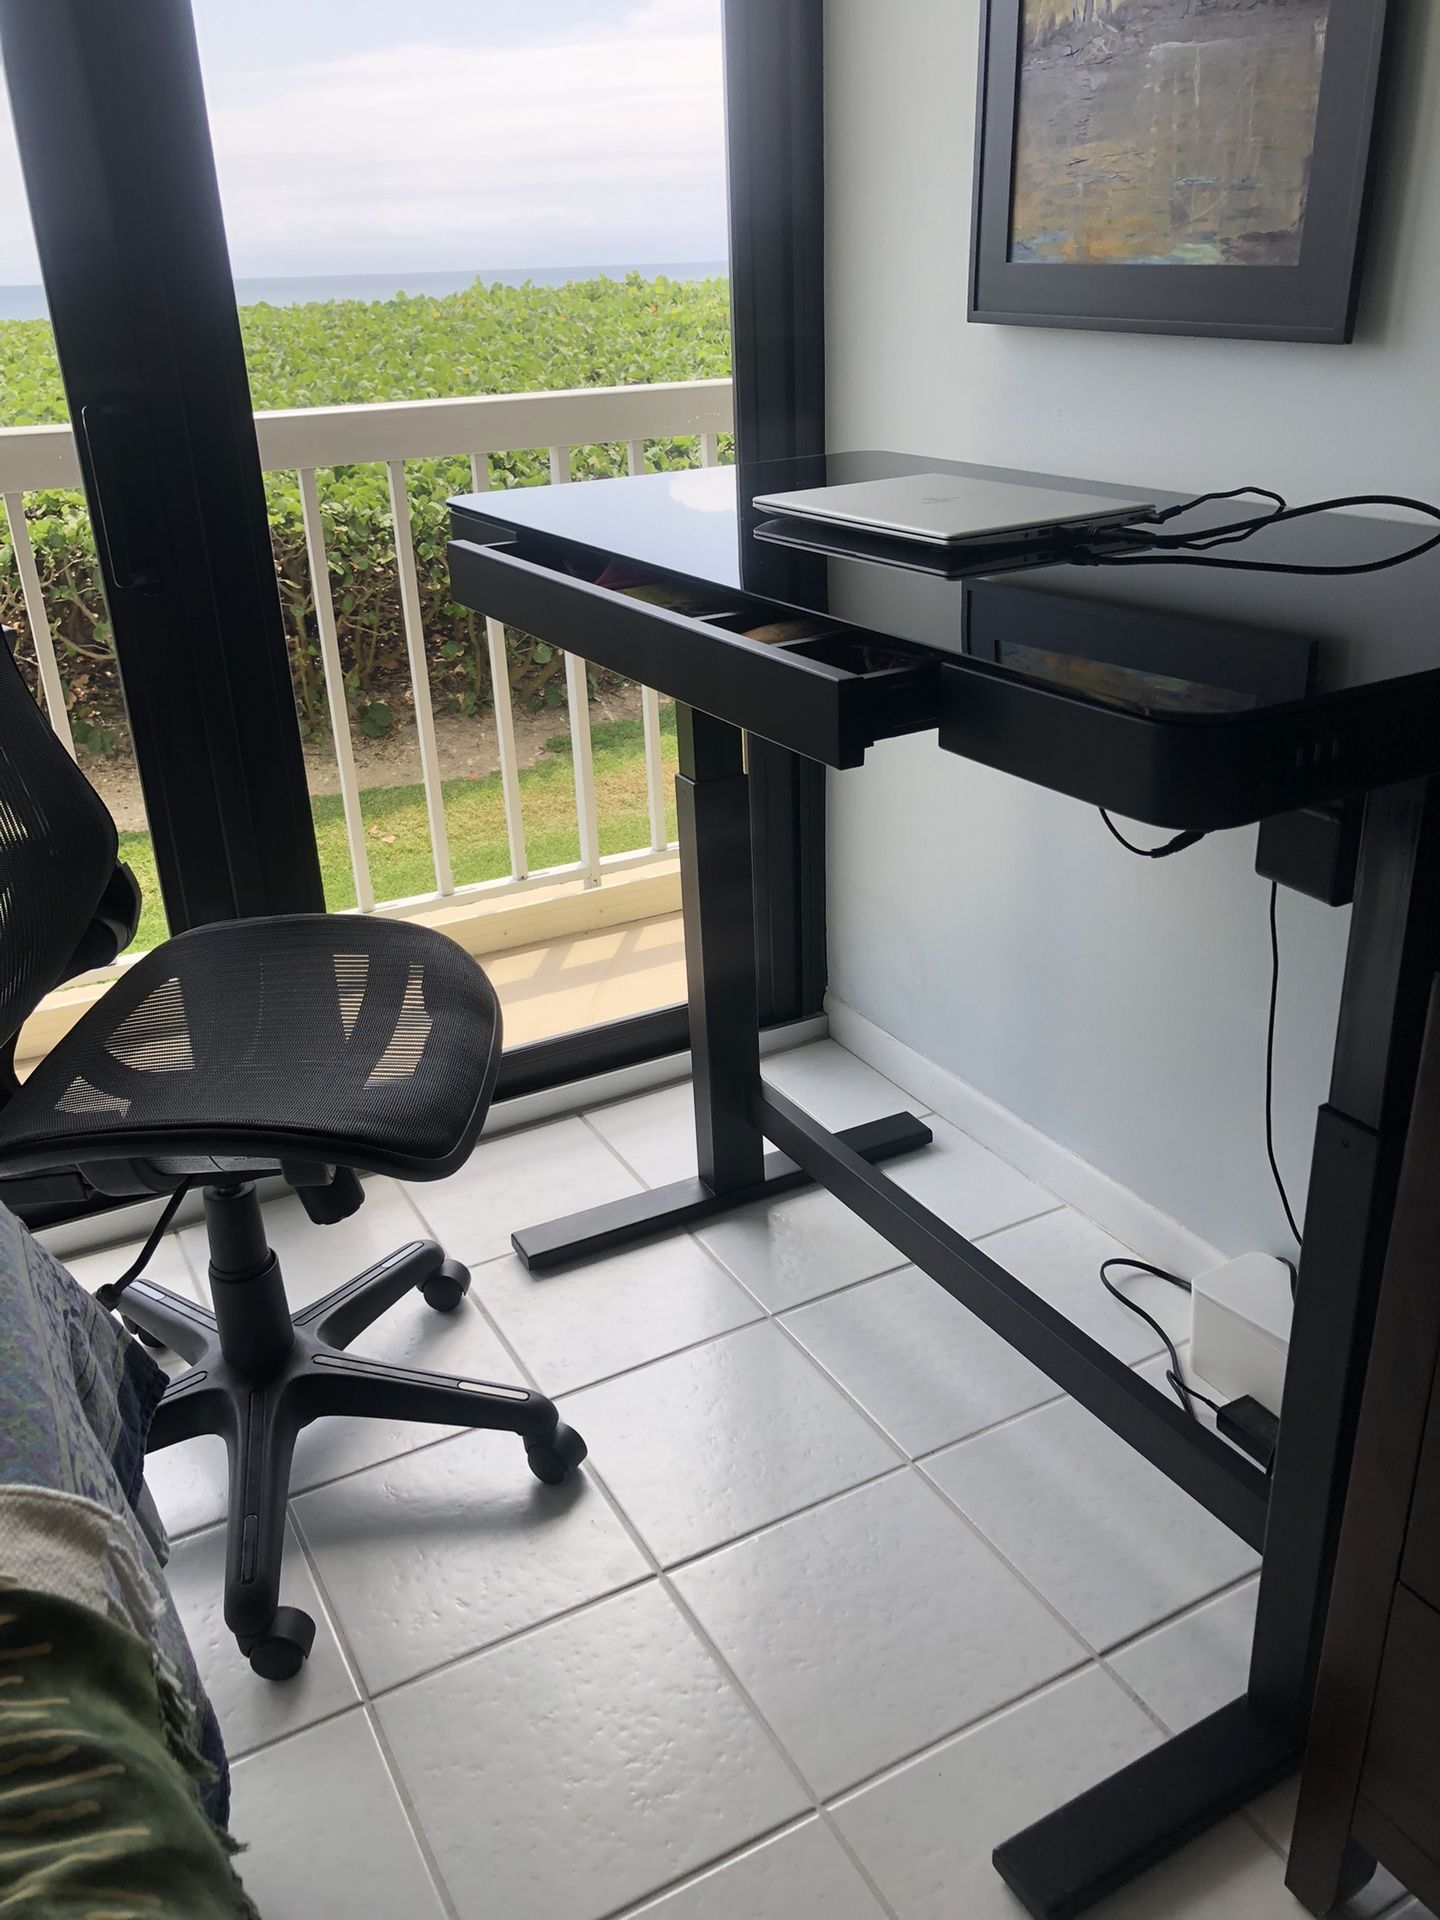 Desk - Adjustable Electric. Including Chair